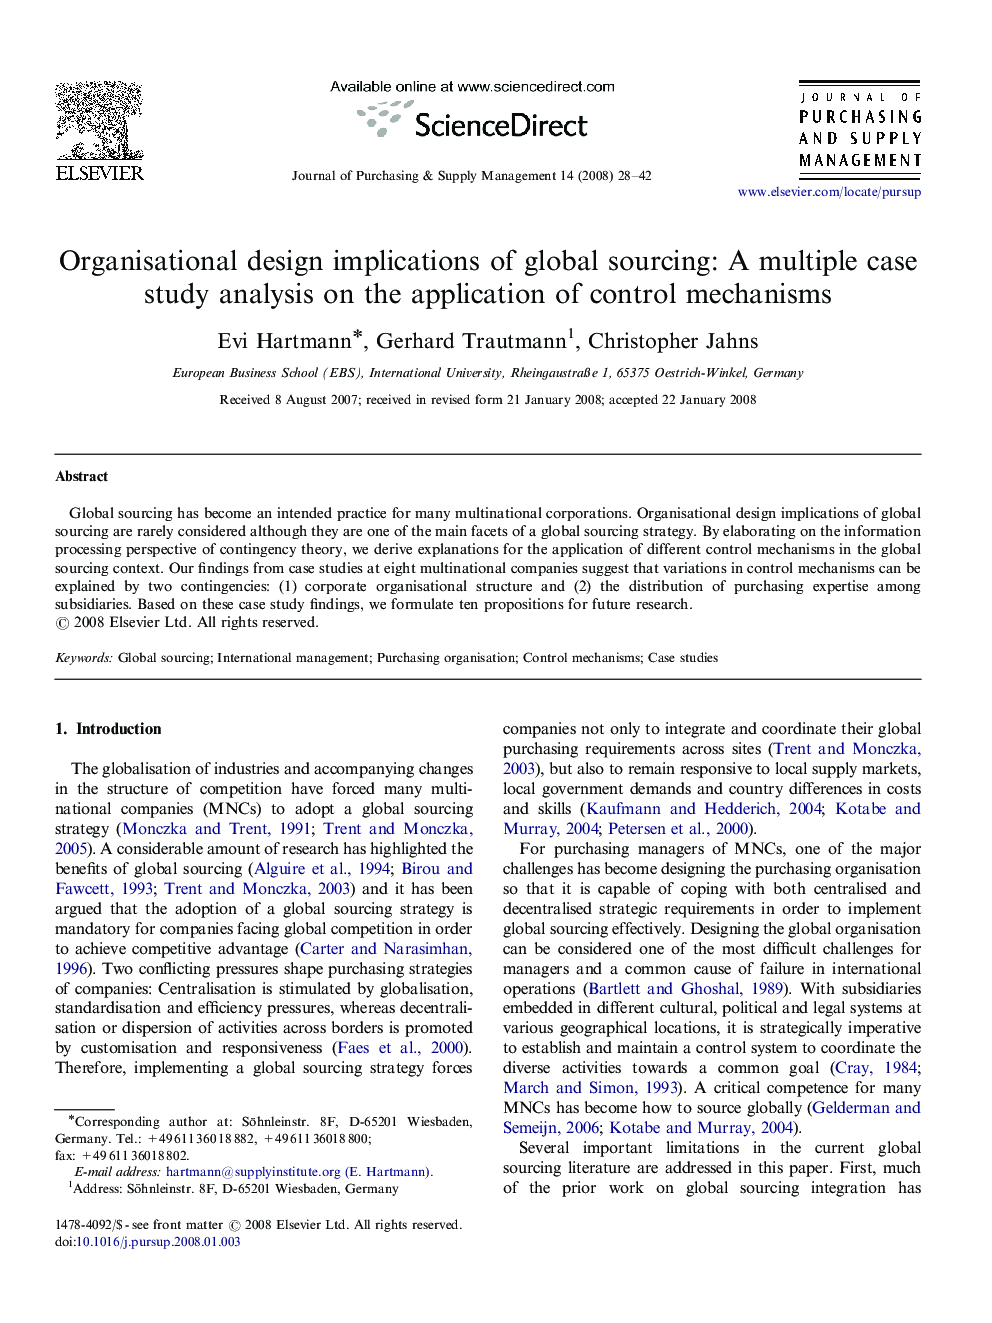 Organisational design implications of global sourcing: A multiple case study analysis on the application of control mechanisms